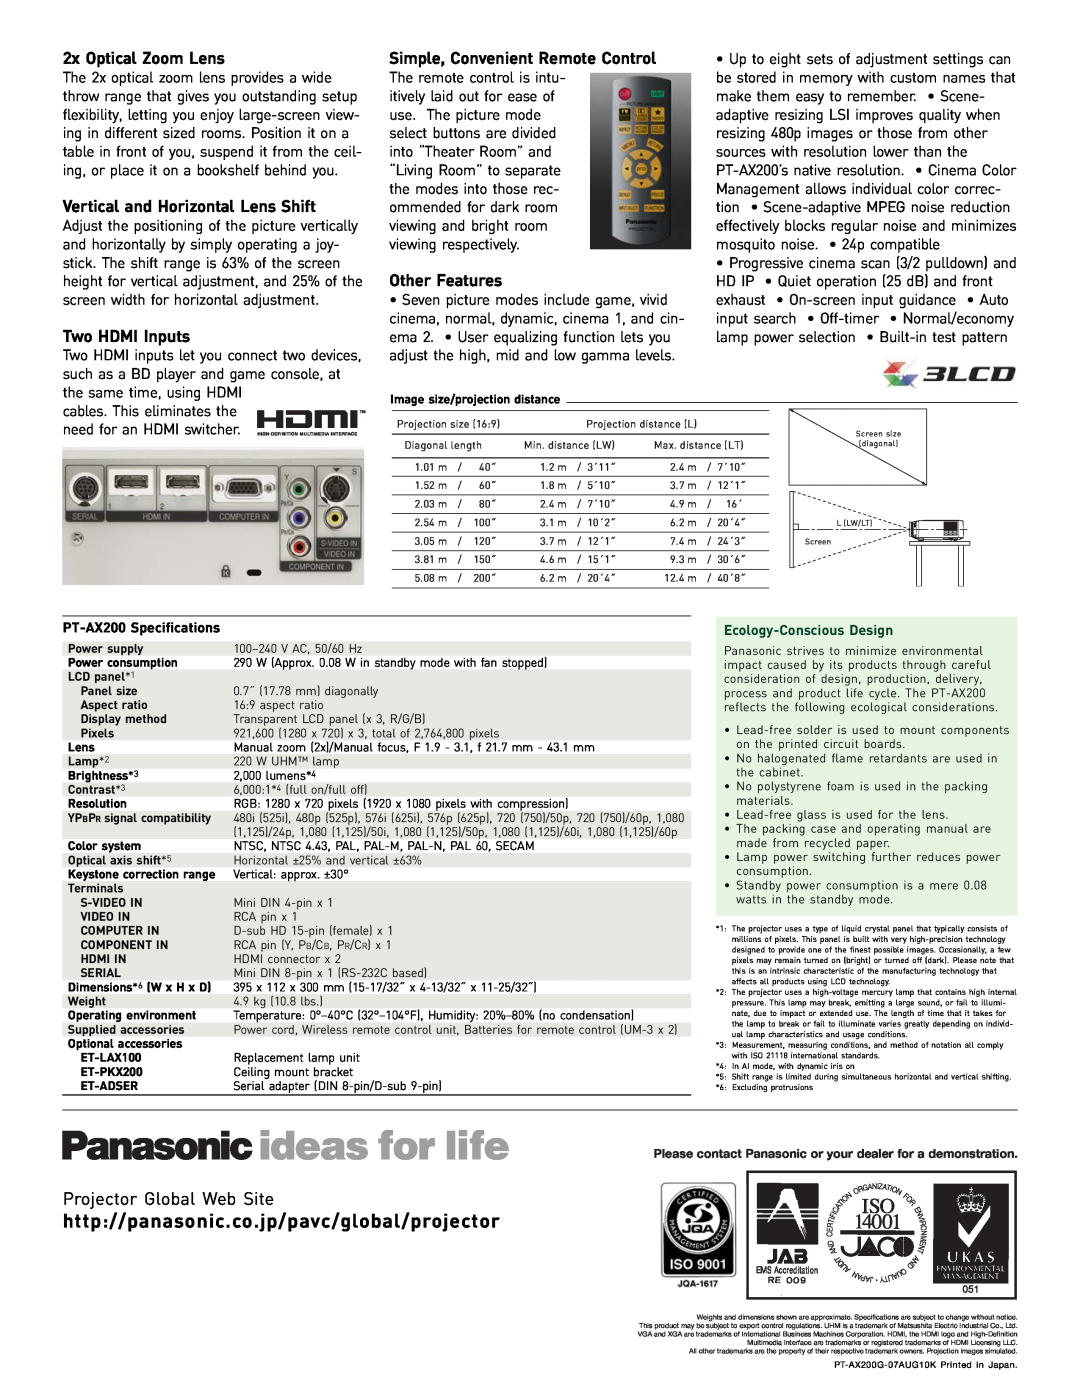 Panasonic PT-AX manual 2x Optical Zoom Lens, Vertical and Horizontal Lens Shift, Two HDMI Inputs, Other Features 